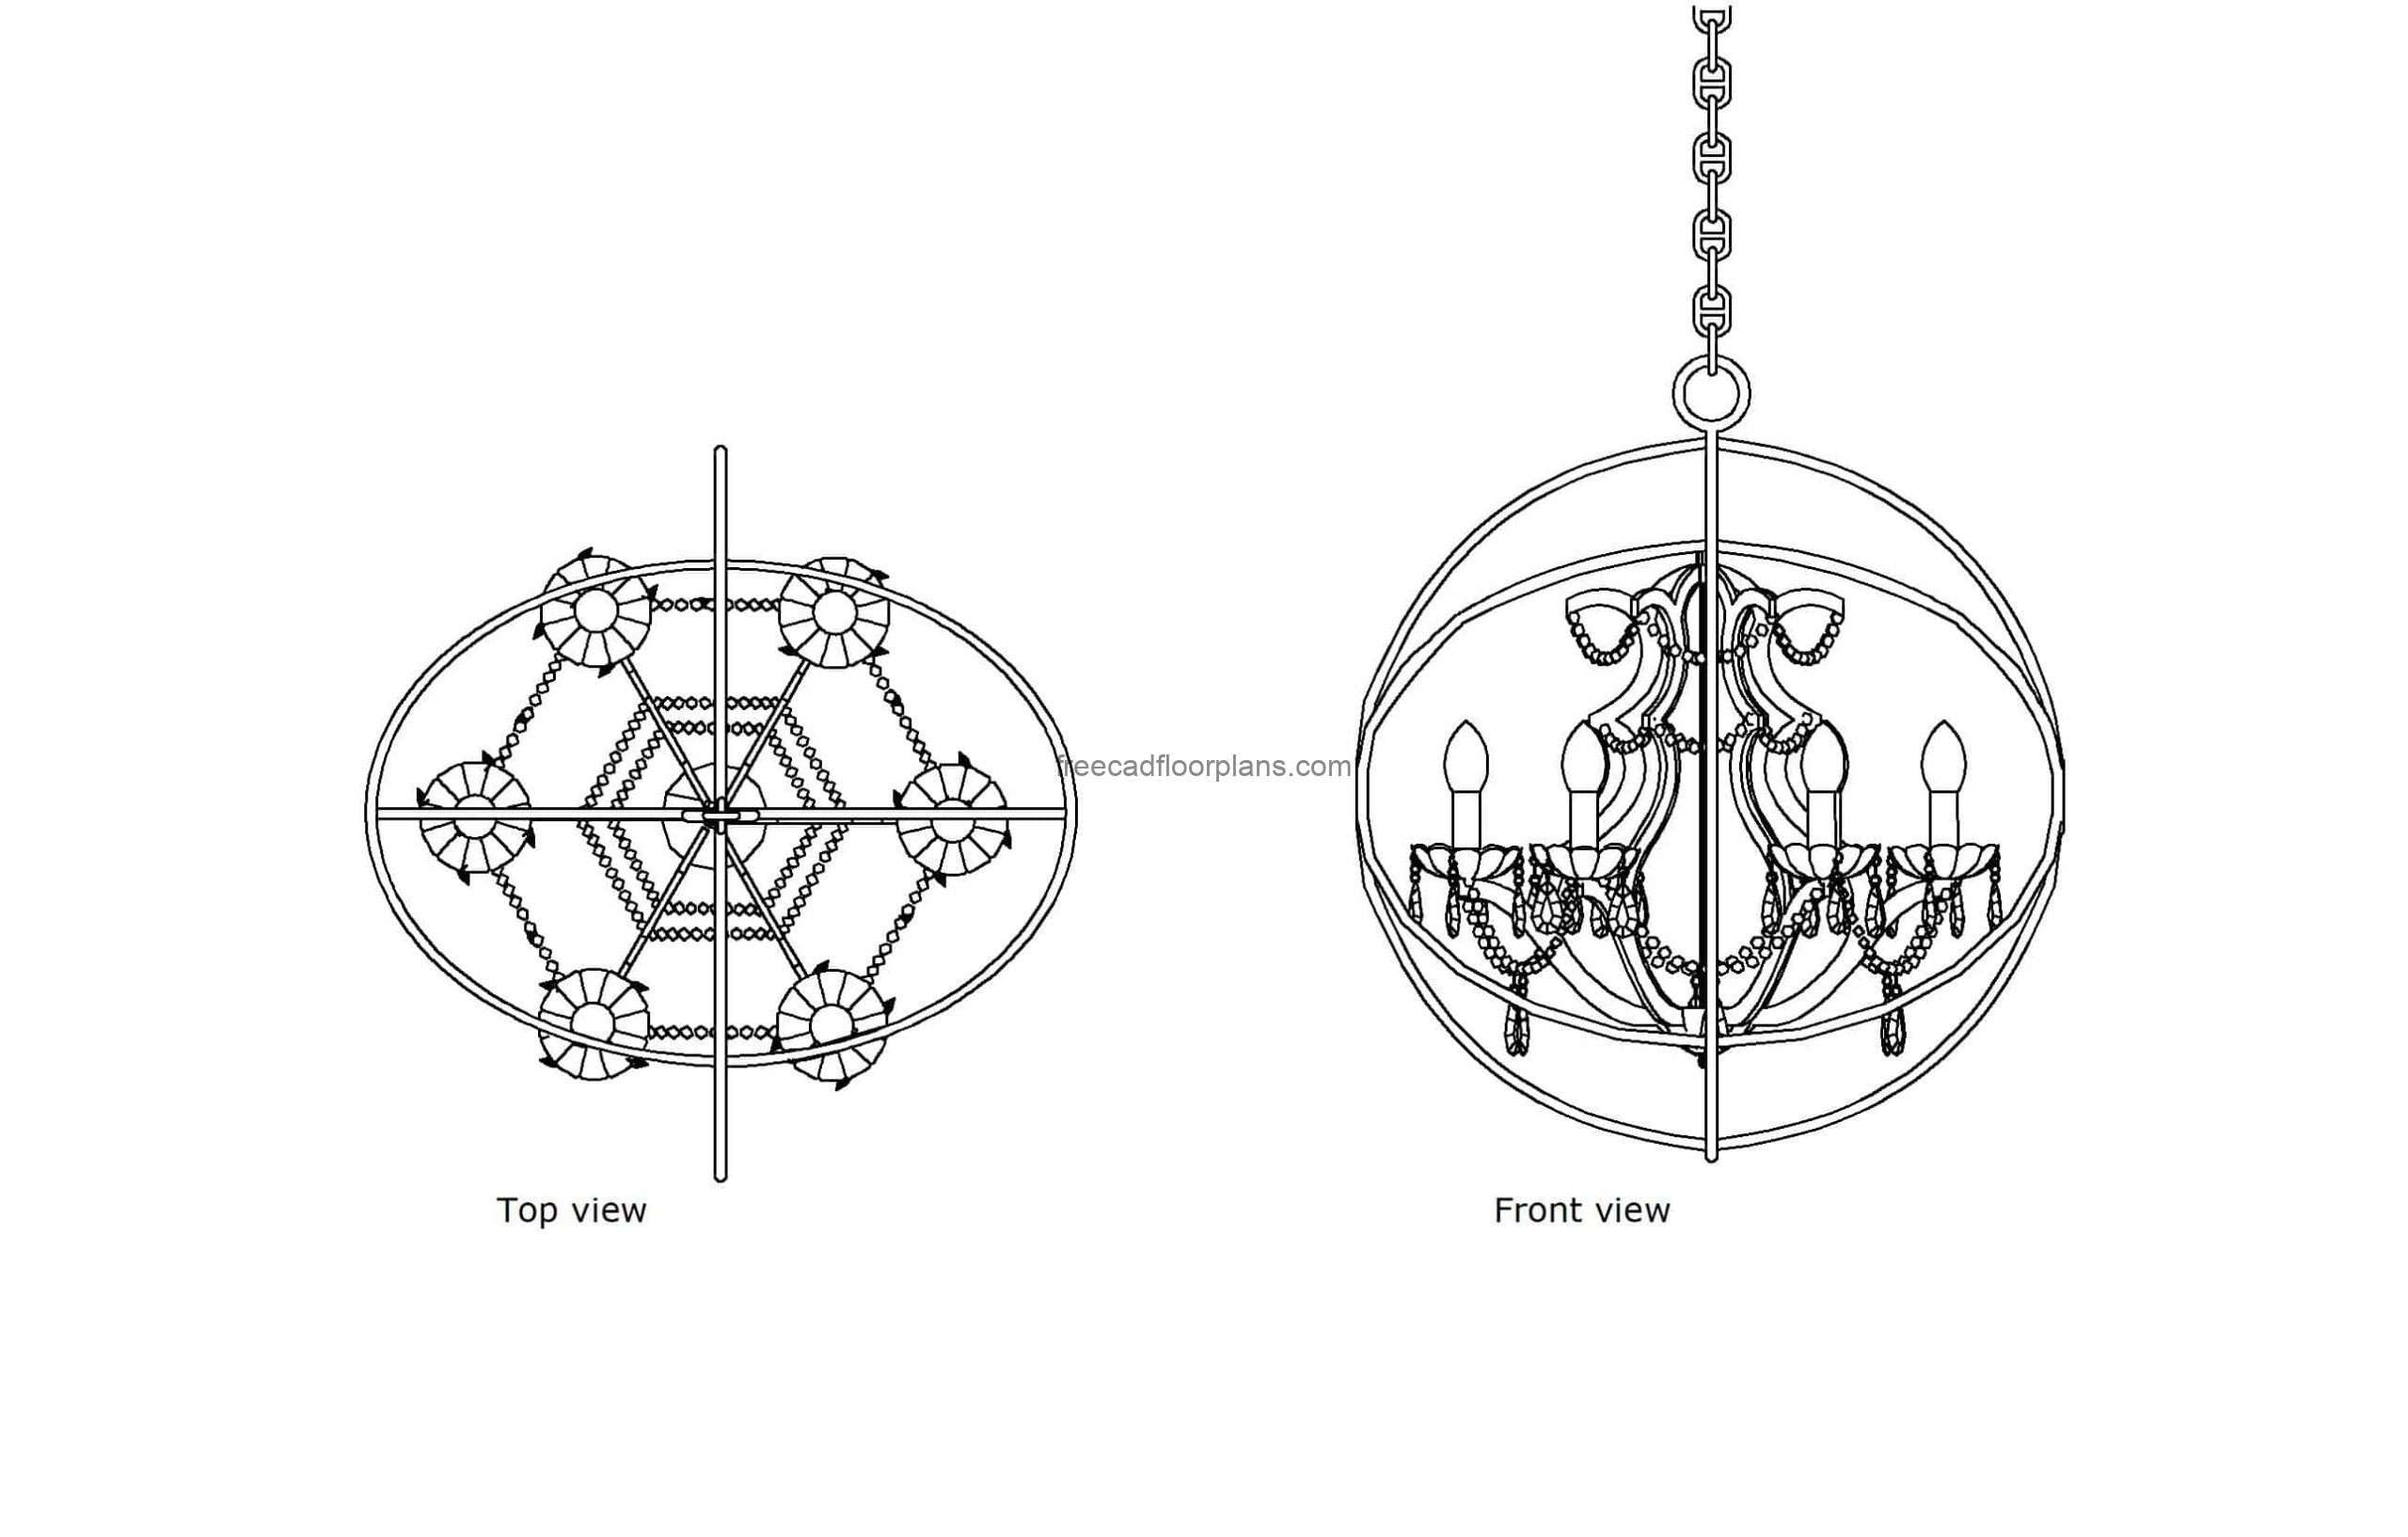 autocad drawing of a orb chandelier, 2d views plan and elevation, dwg file free for download